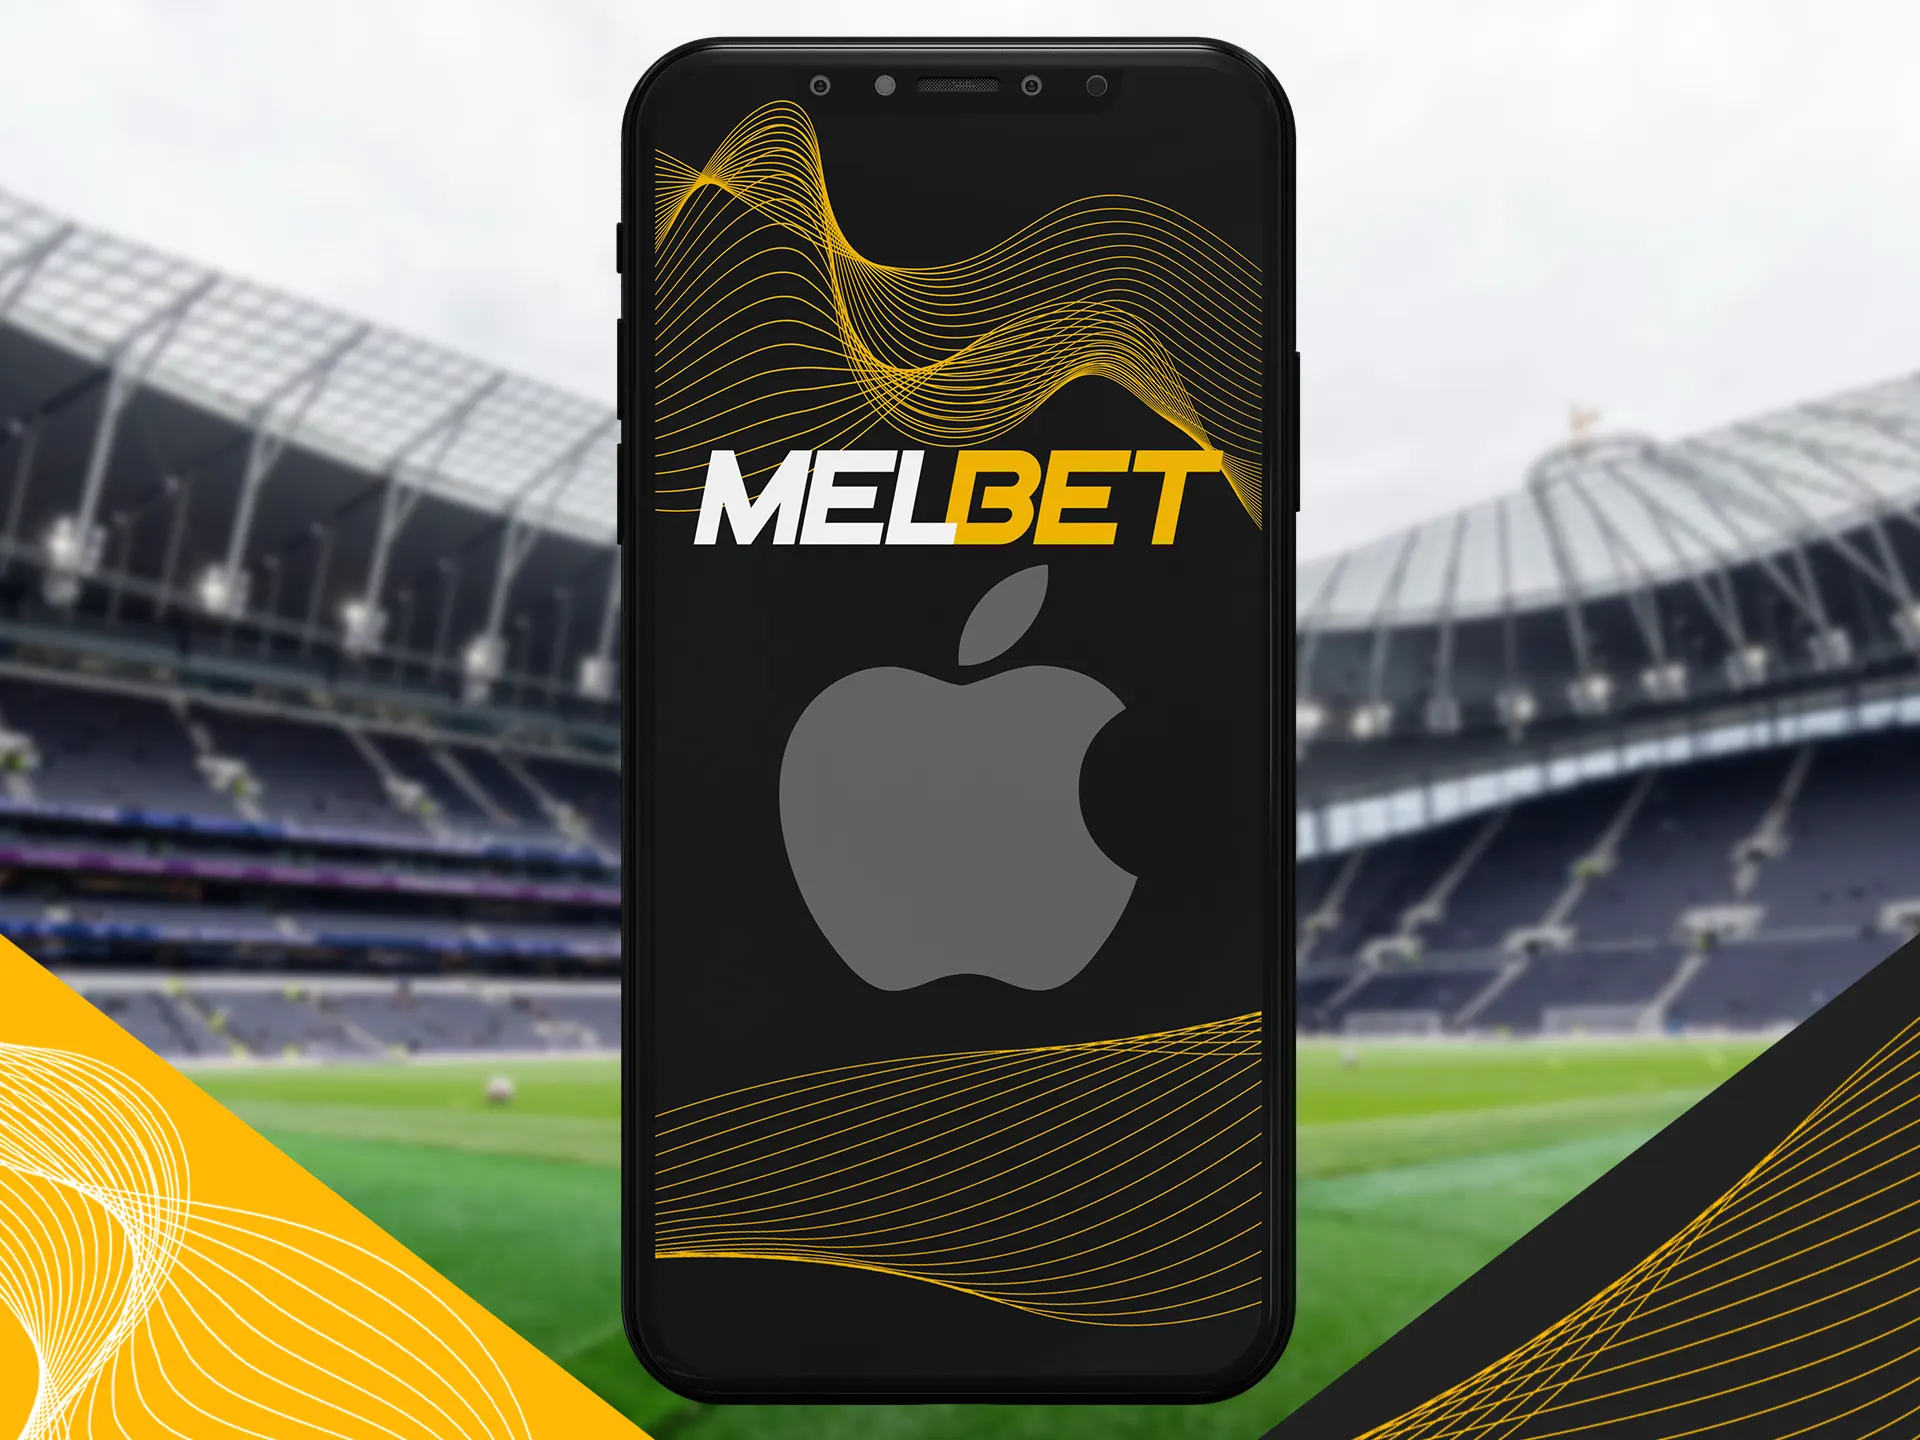 Install Melbet app on all of your iOS devices.